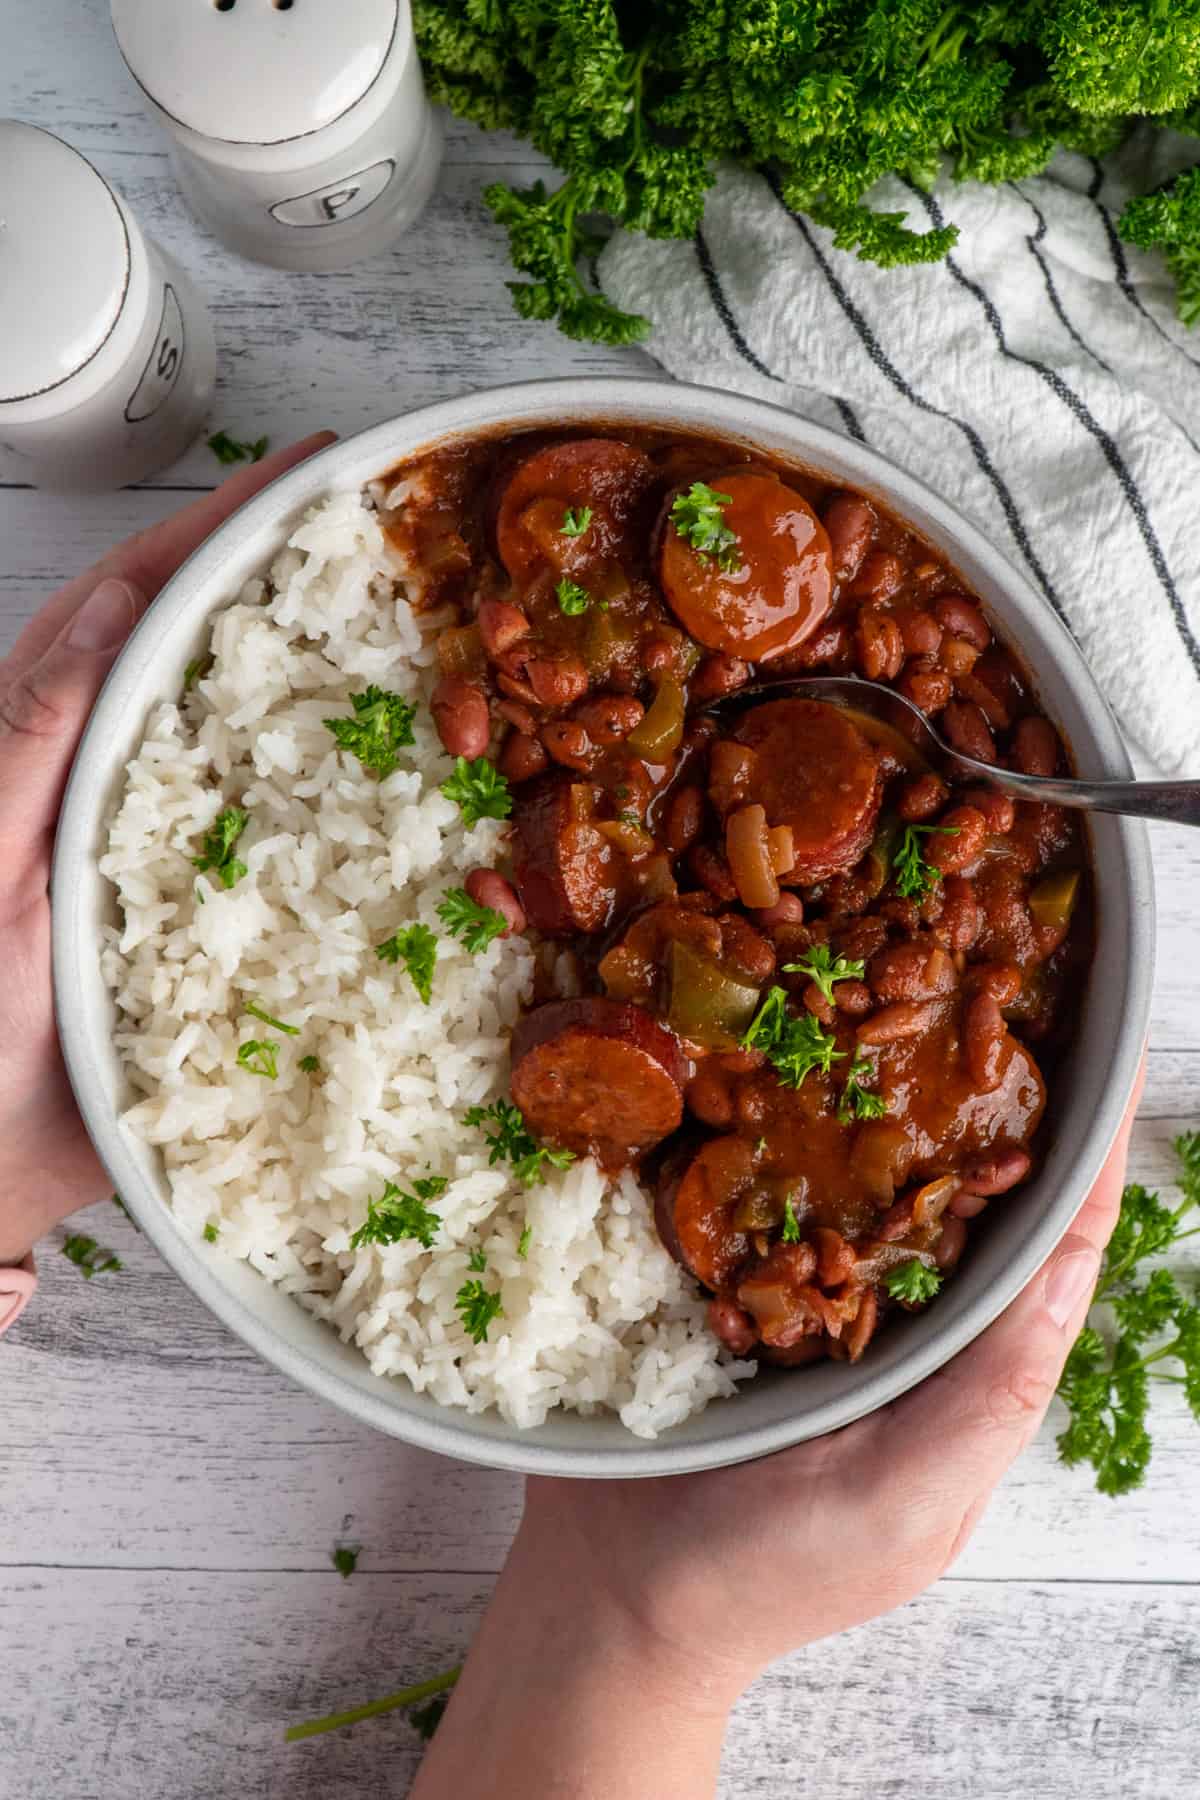 Hands holding a bowl of red beans and rice garnished with parsley.